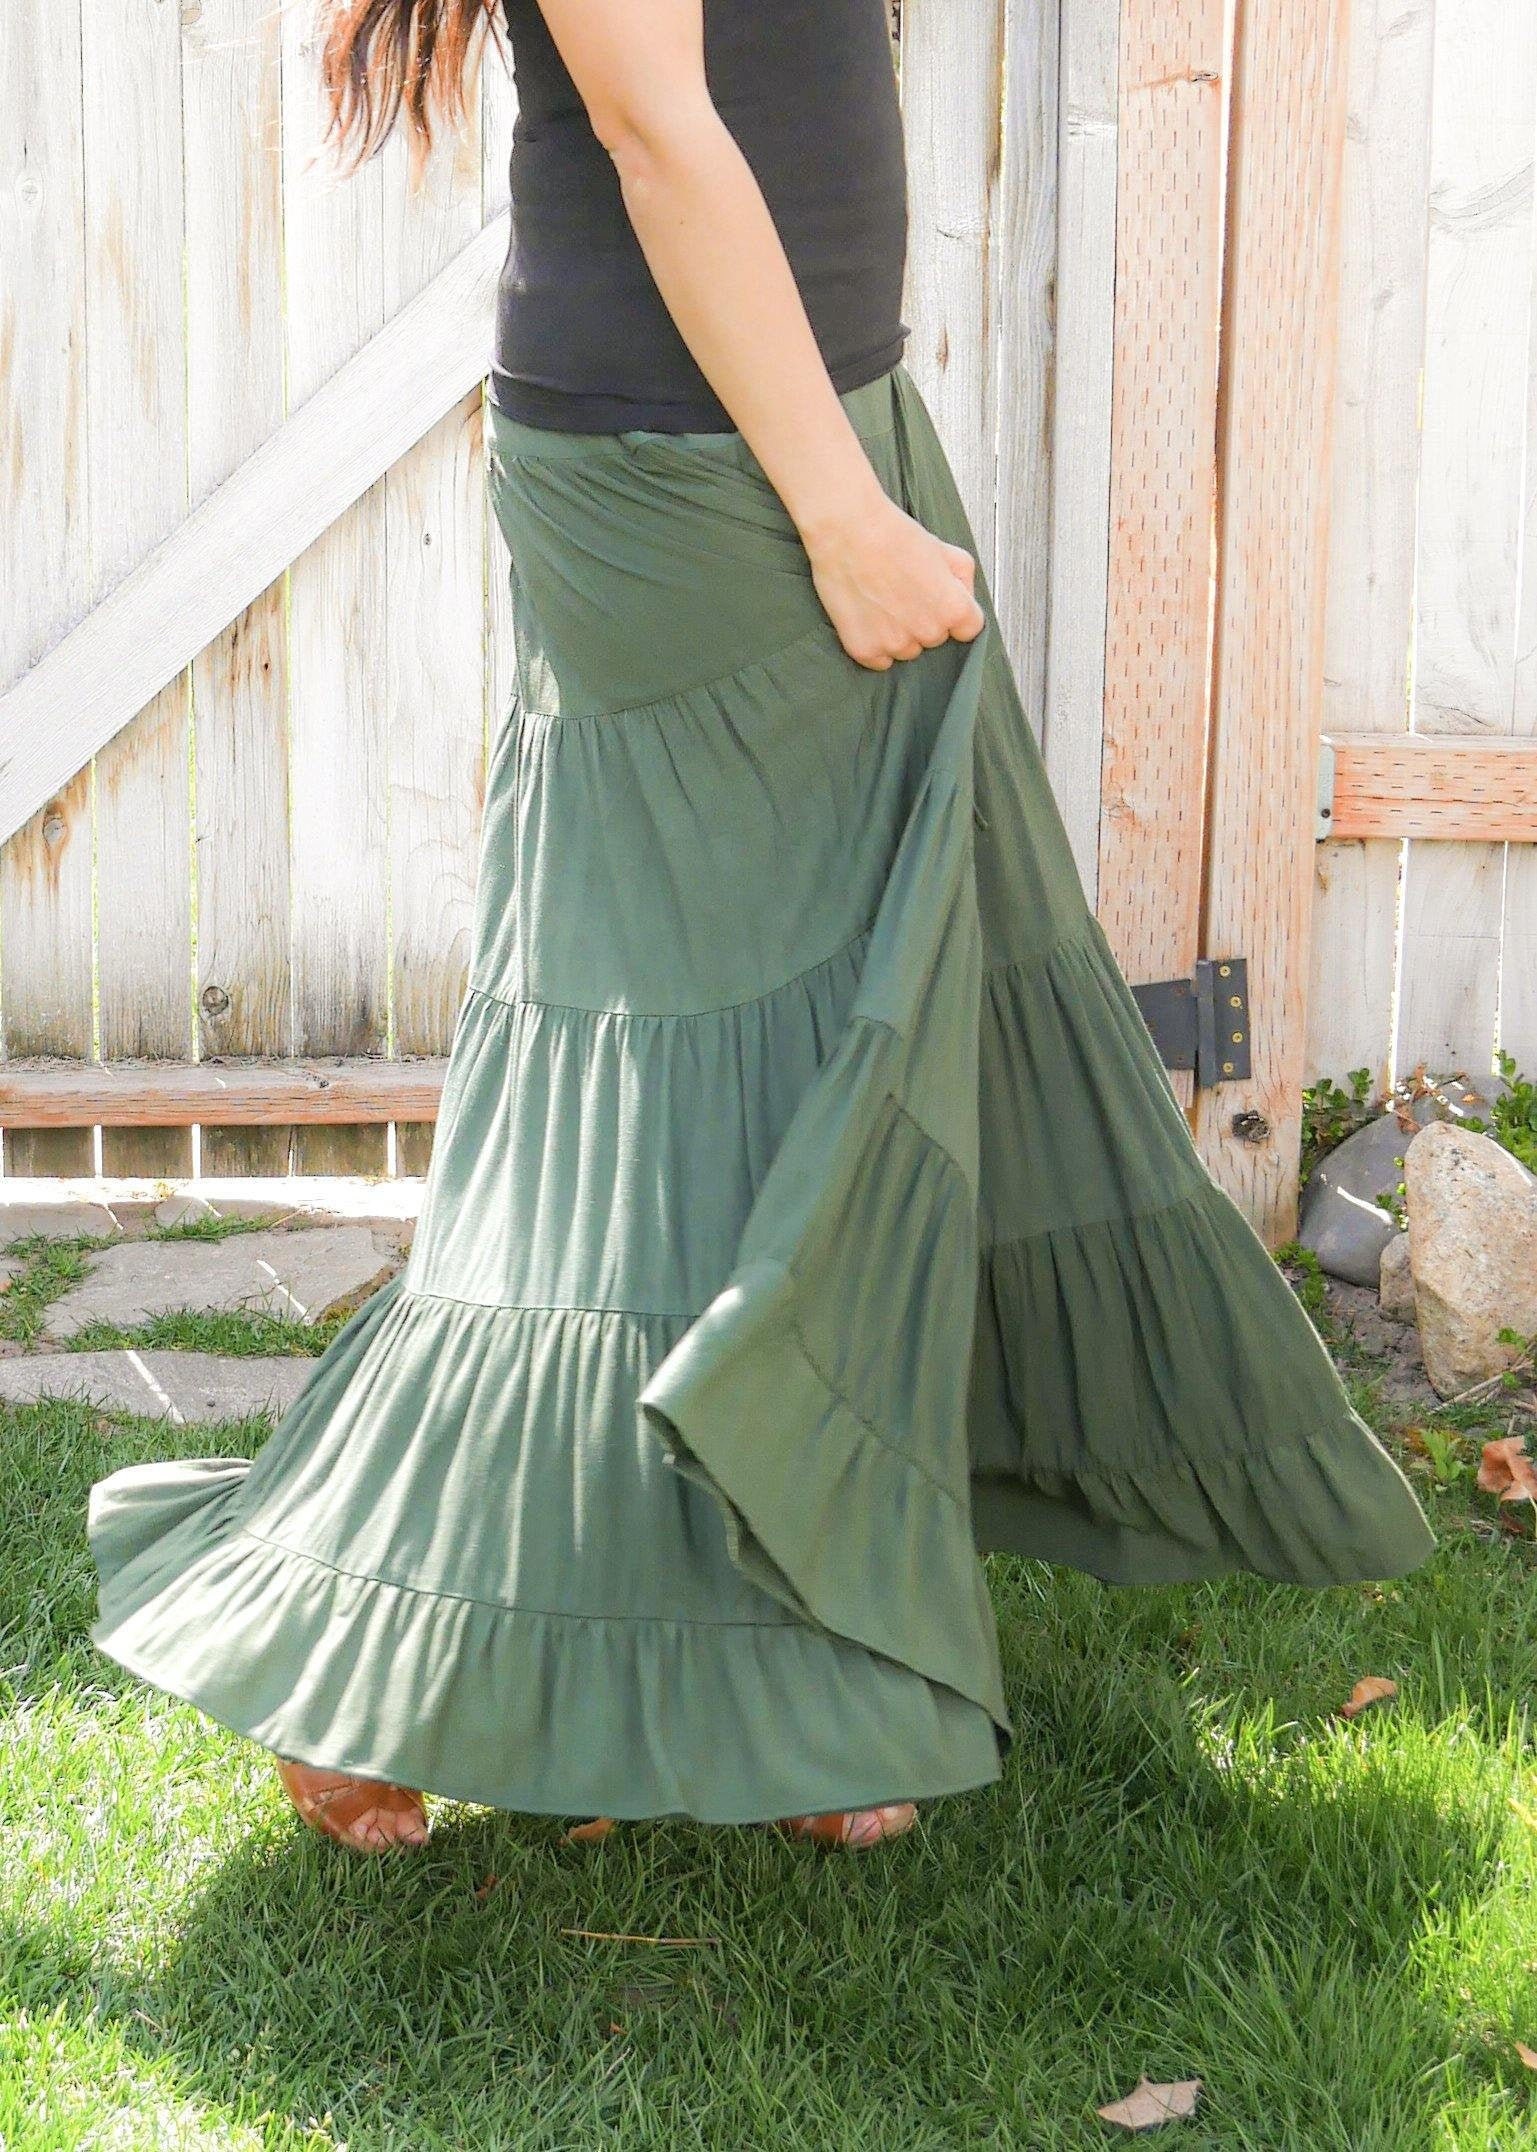 Dove in Forest Green Tiered Flowing Maxi Skirt Sustainable - Etsy